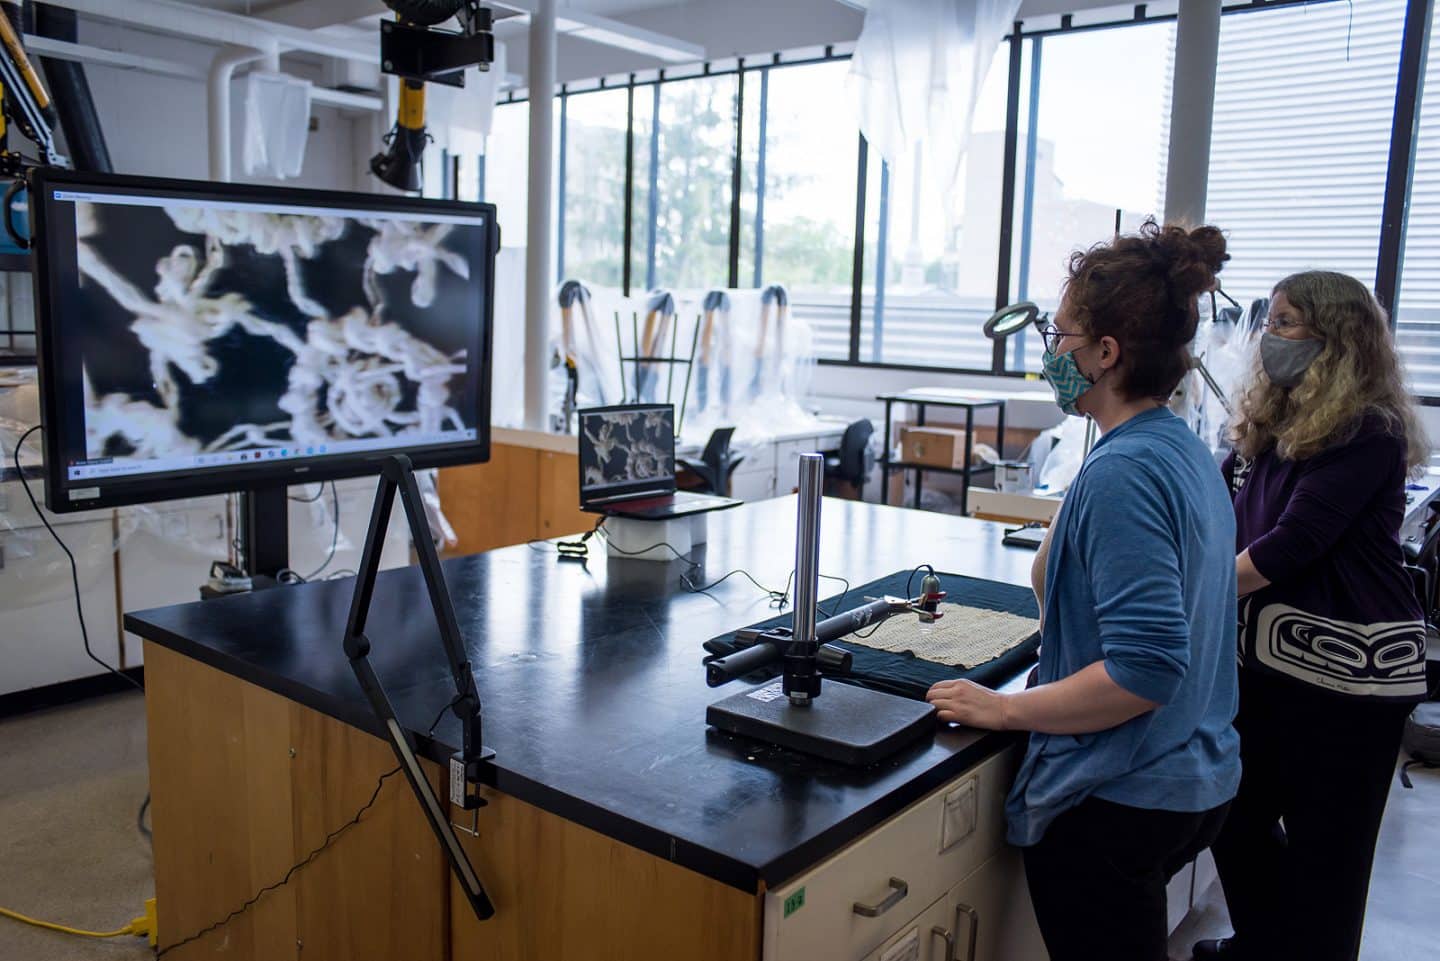 Working in the object conservation lab in Art Conservation's labs , Laura Peers and Anne-Marie Guérin demonstrate the multiple-camera setup used to provide visits with Indigenous ancestors in Agnes’s care.